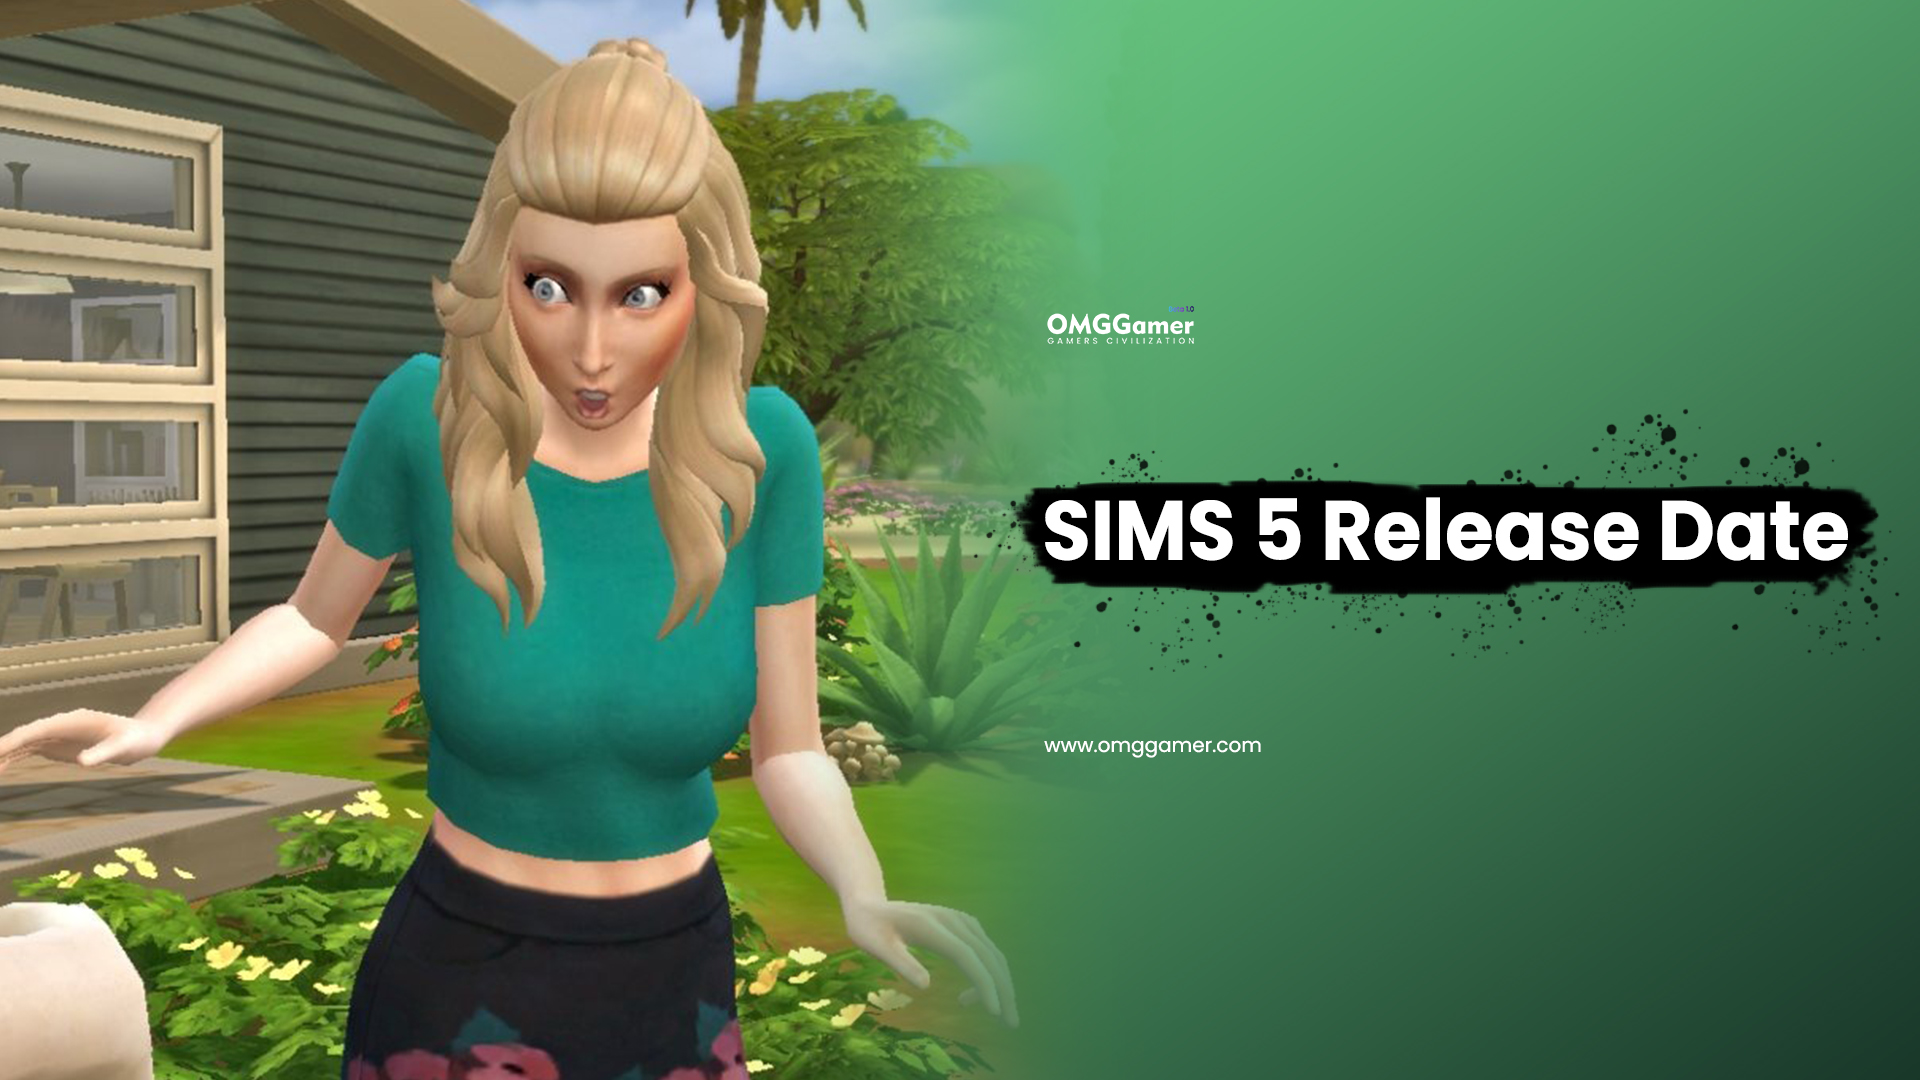 SIMS 5 Release Date